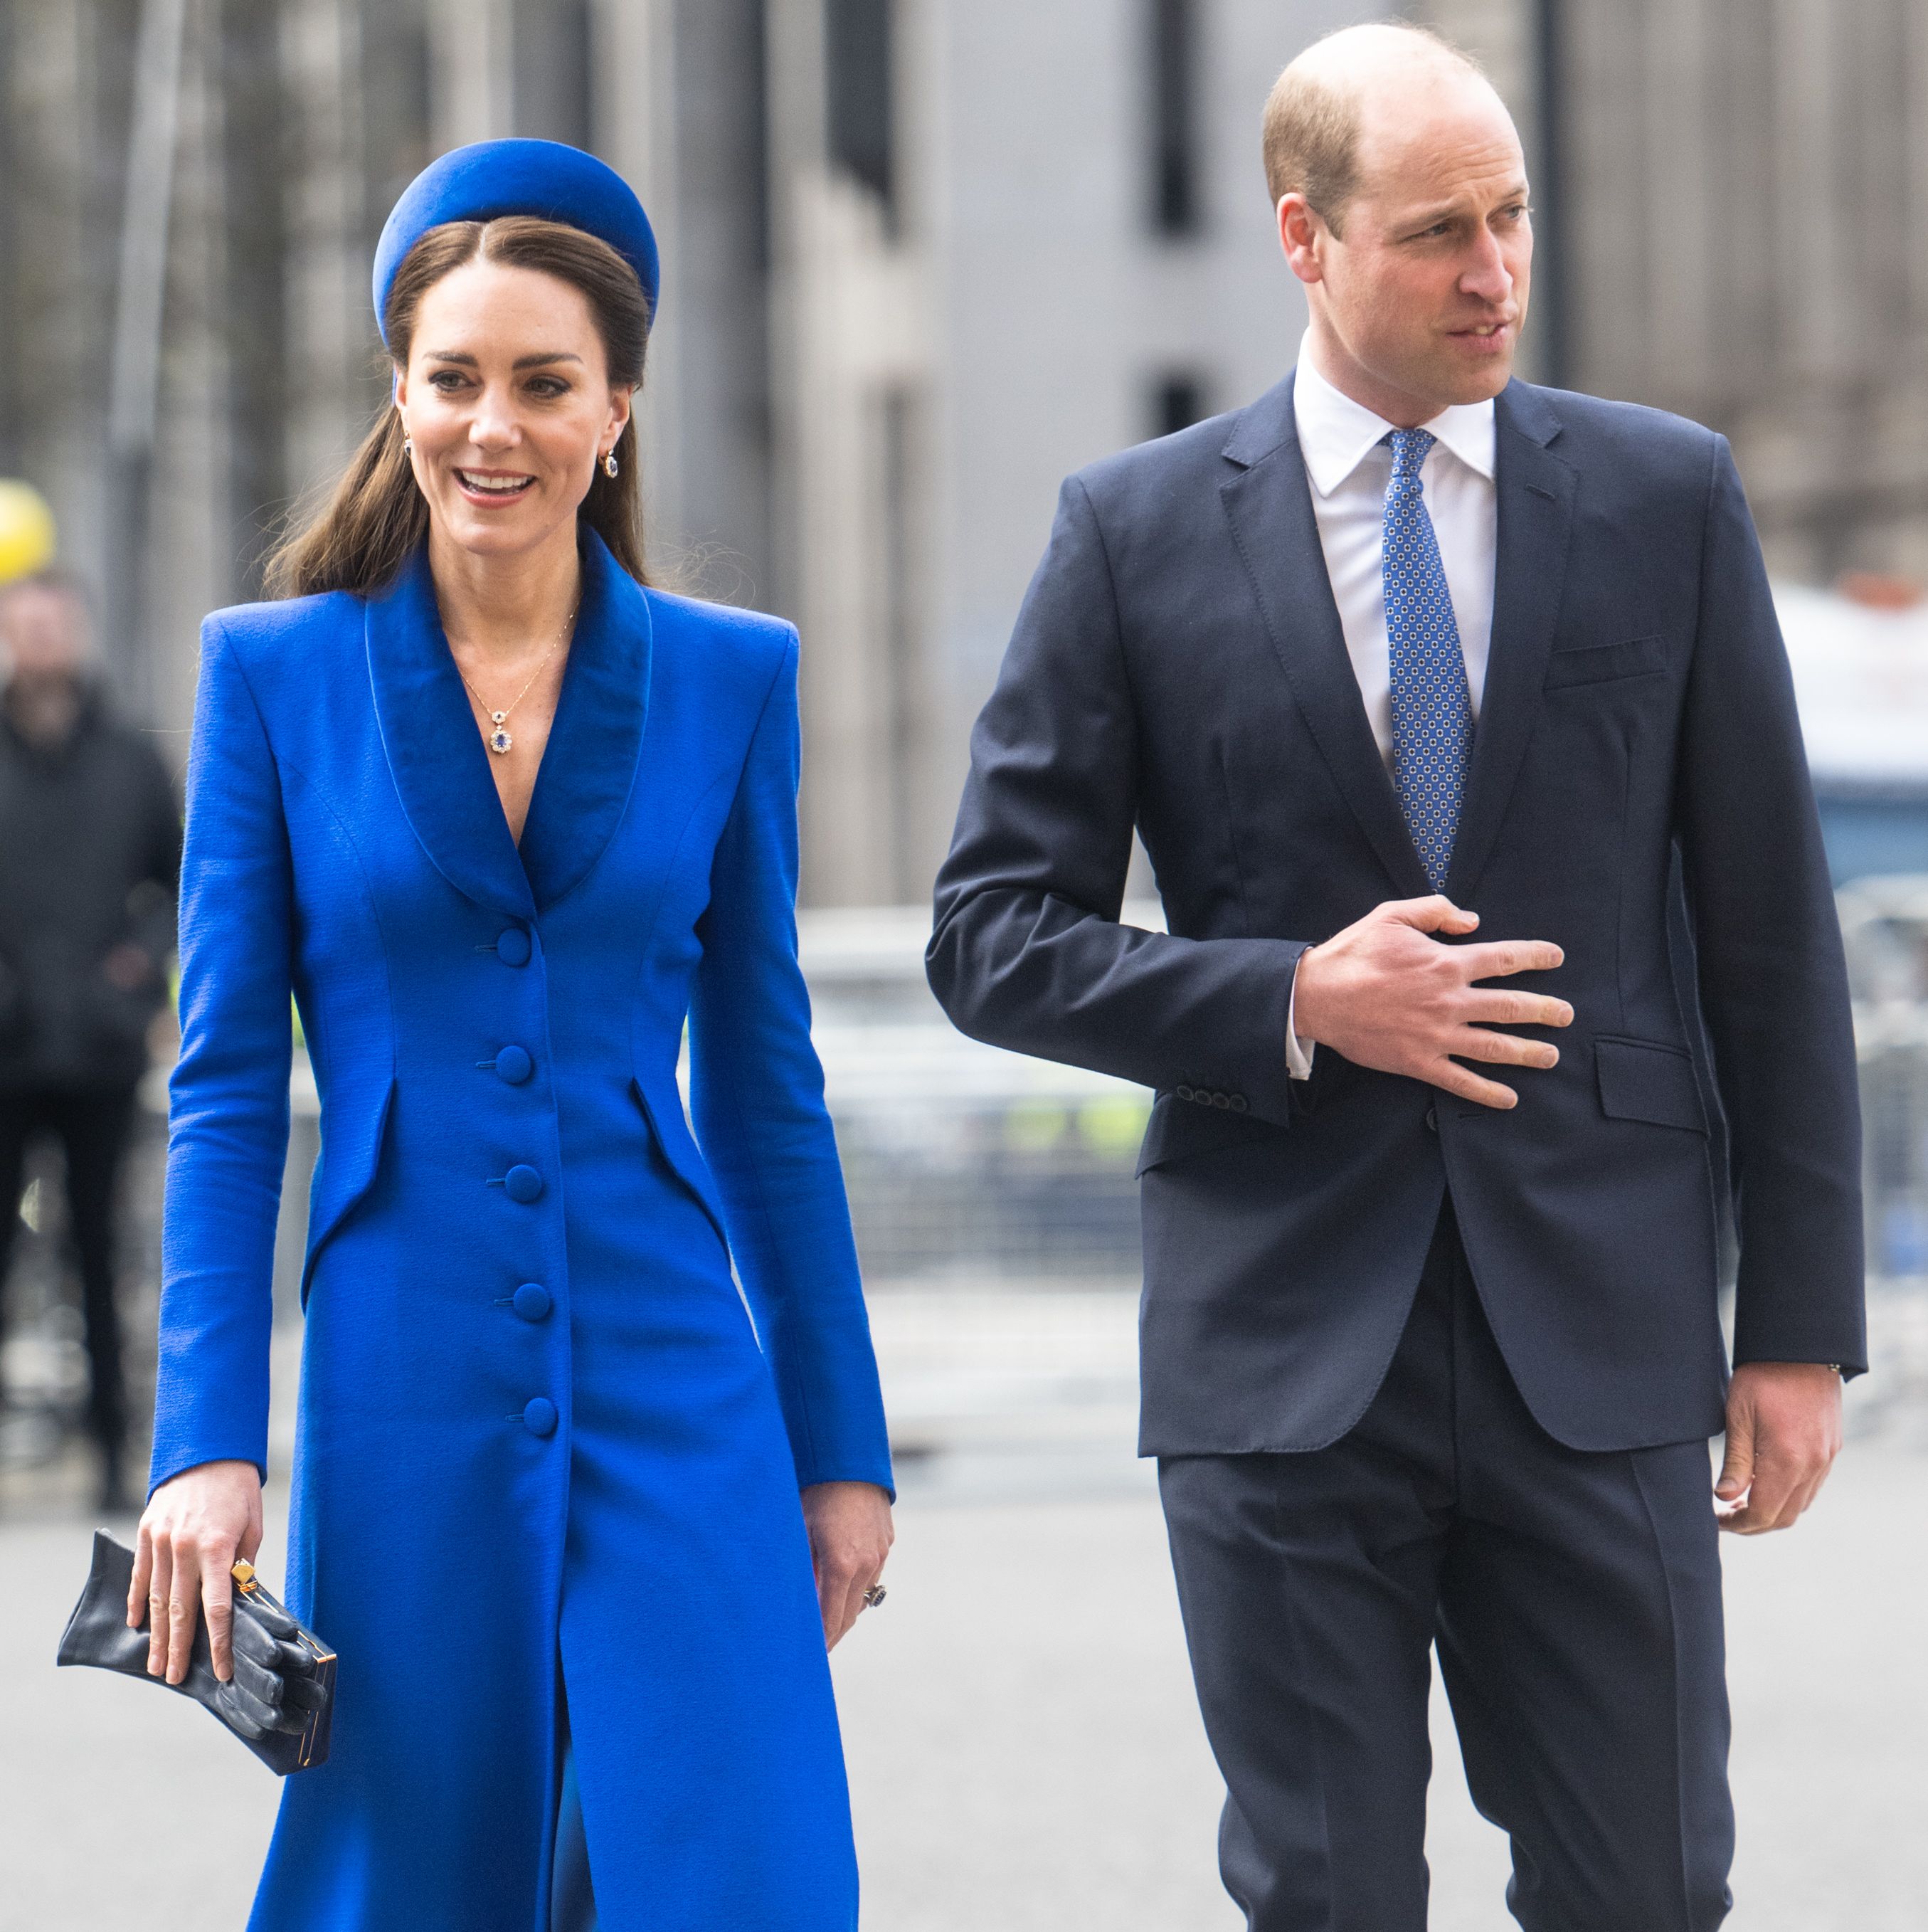 See All the Best Photos of the Royal Family at the 2022 Commonwealth Day Service